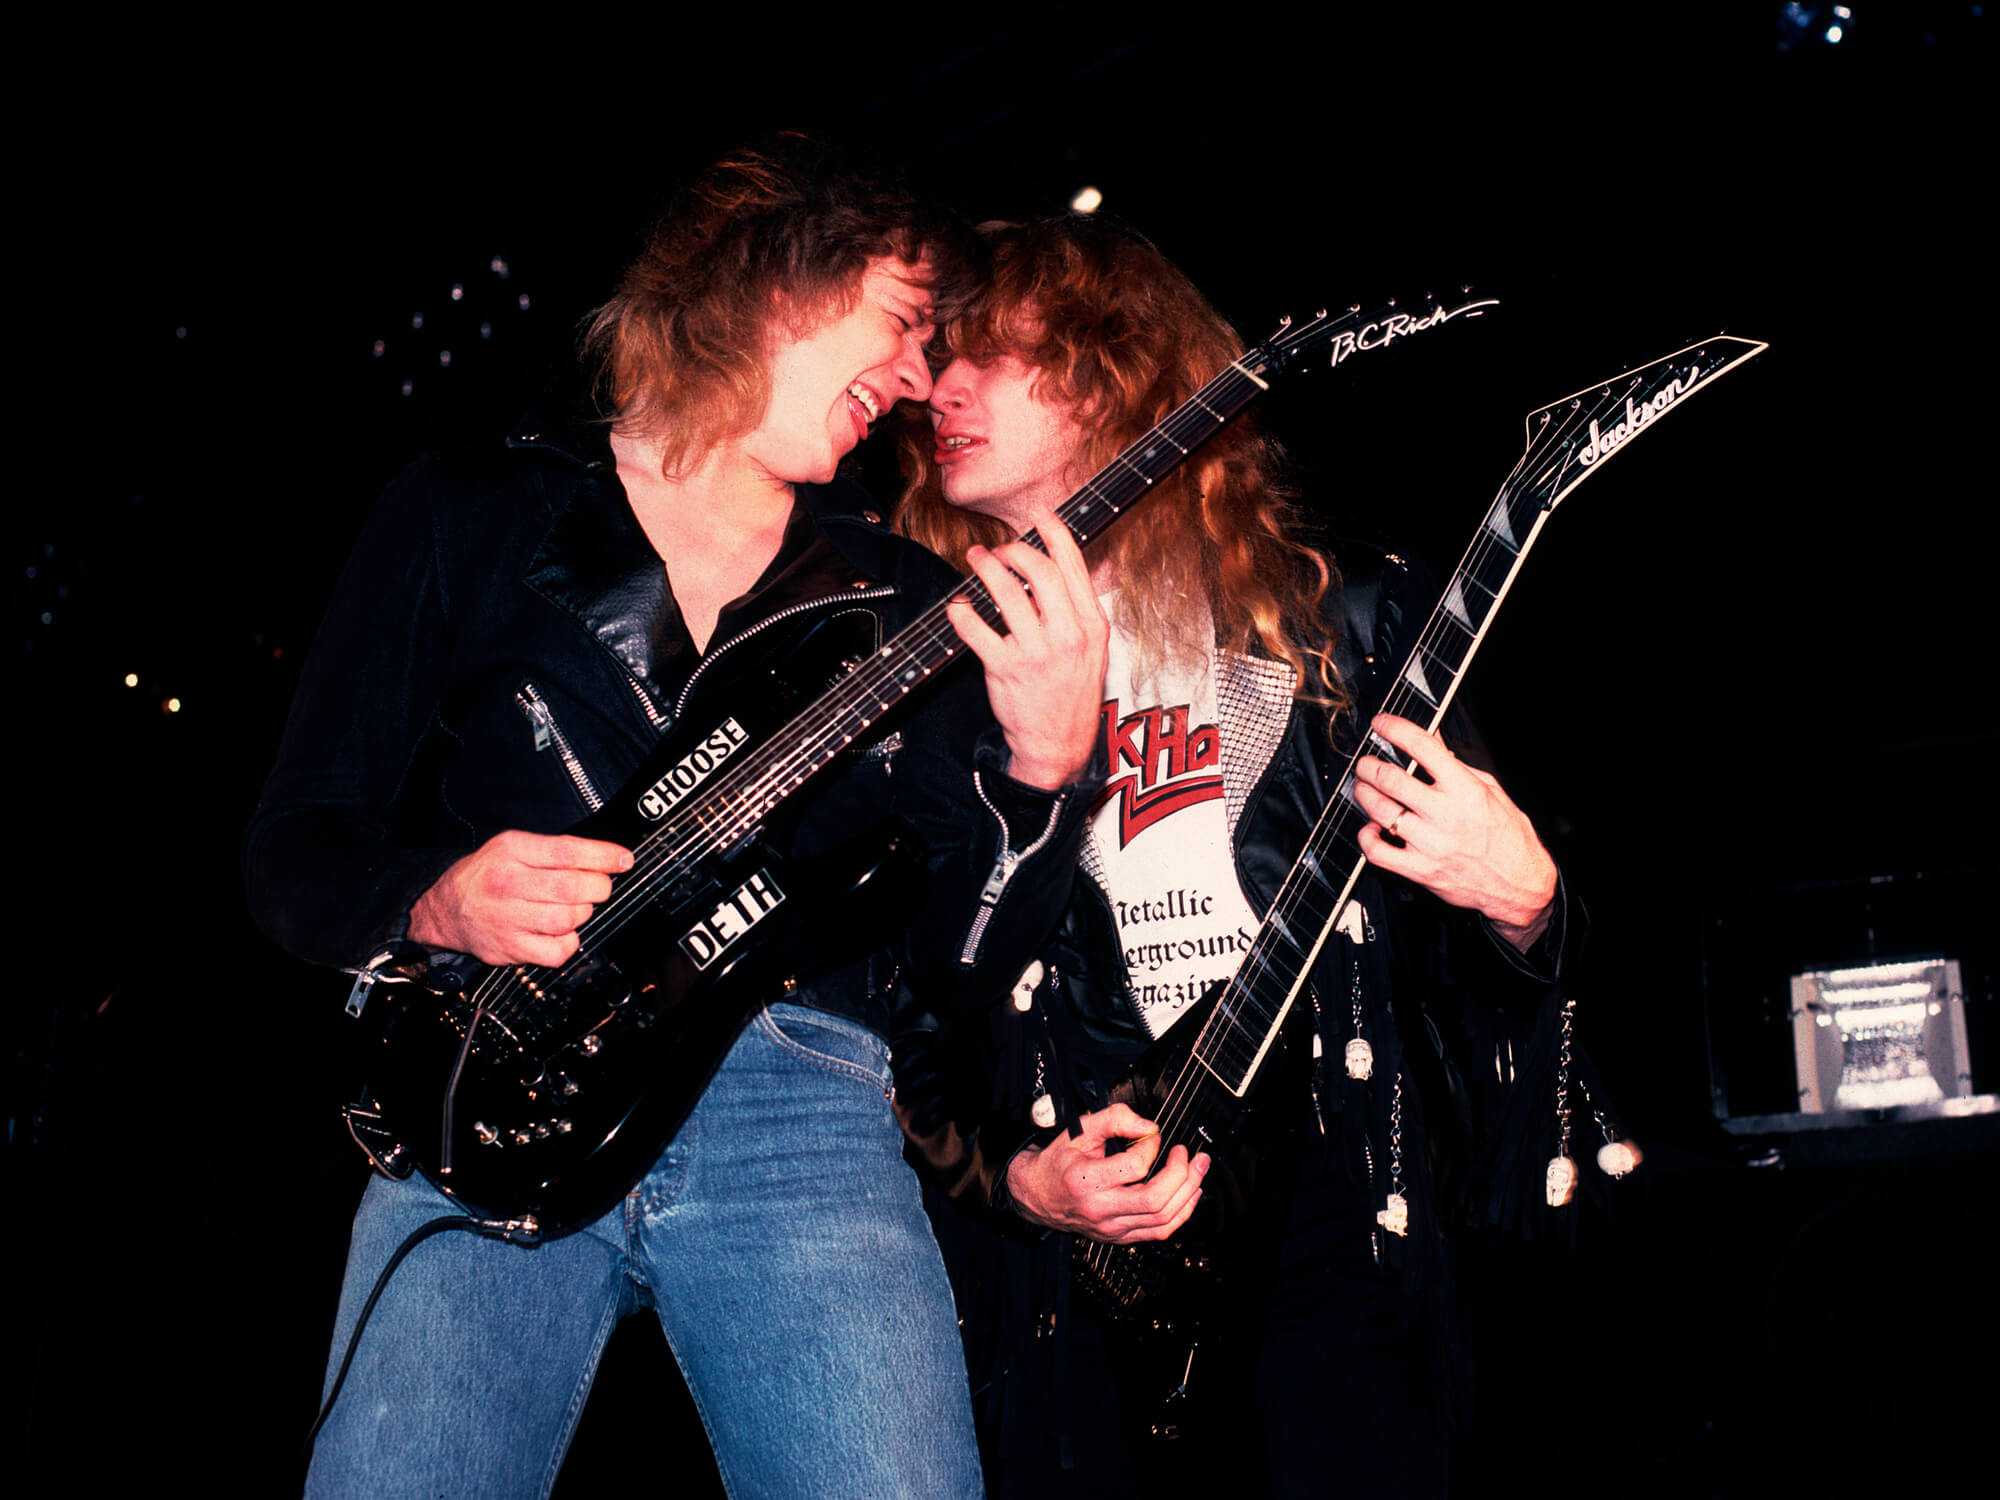 Chris Poland, left, and Dave Mustaine of Megadeth